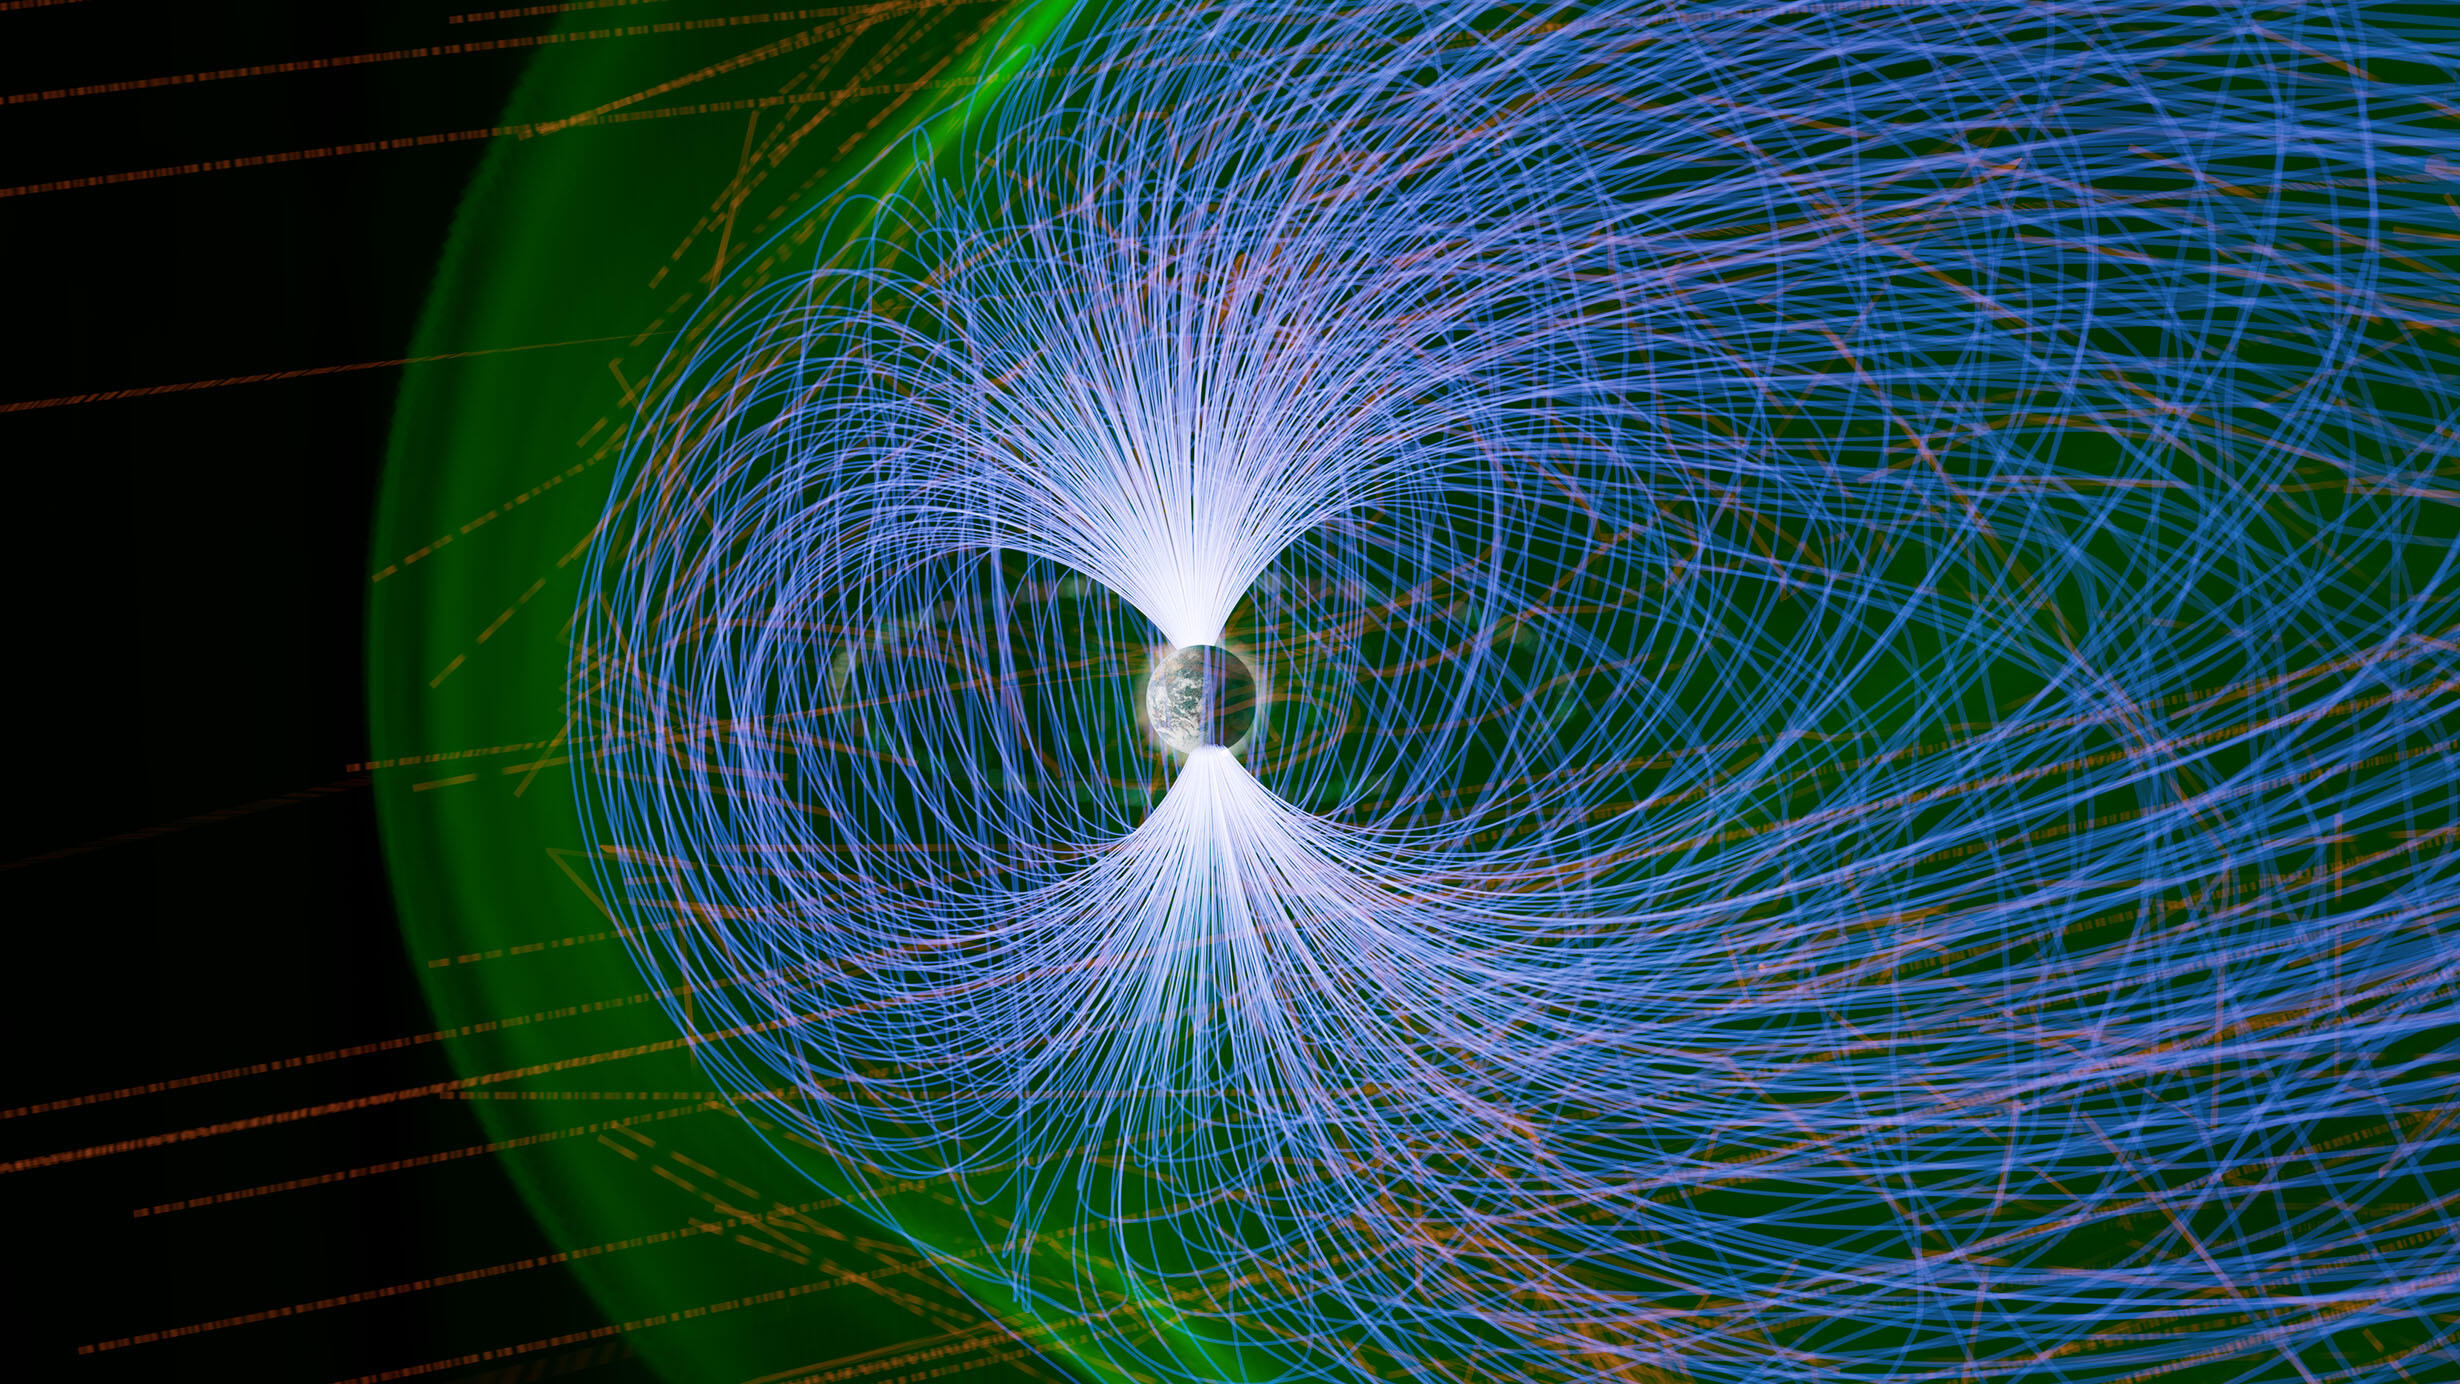 Colored lines in different patterns are used to depict Earth's protective magnetic field.